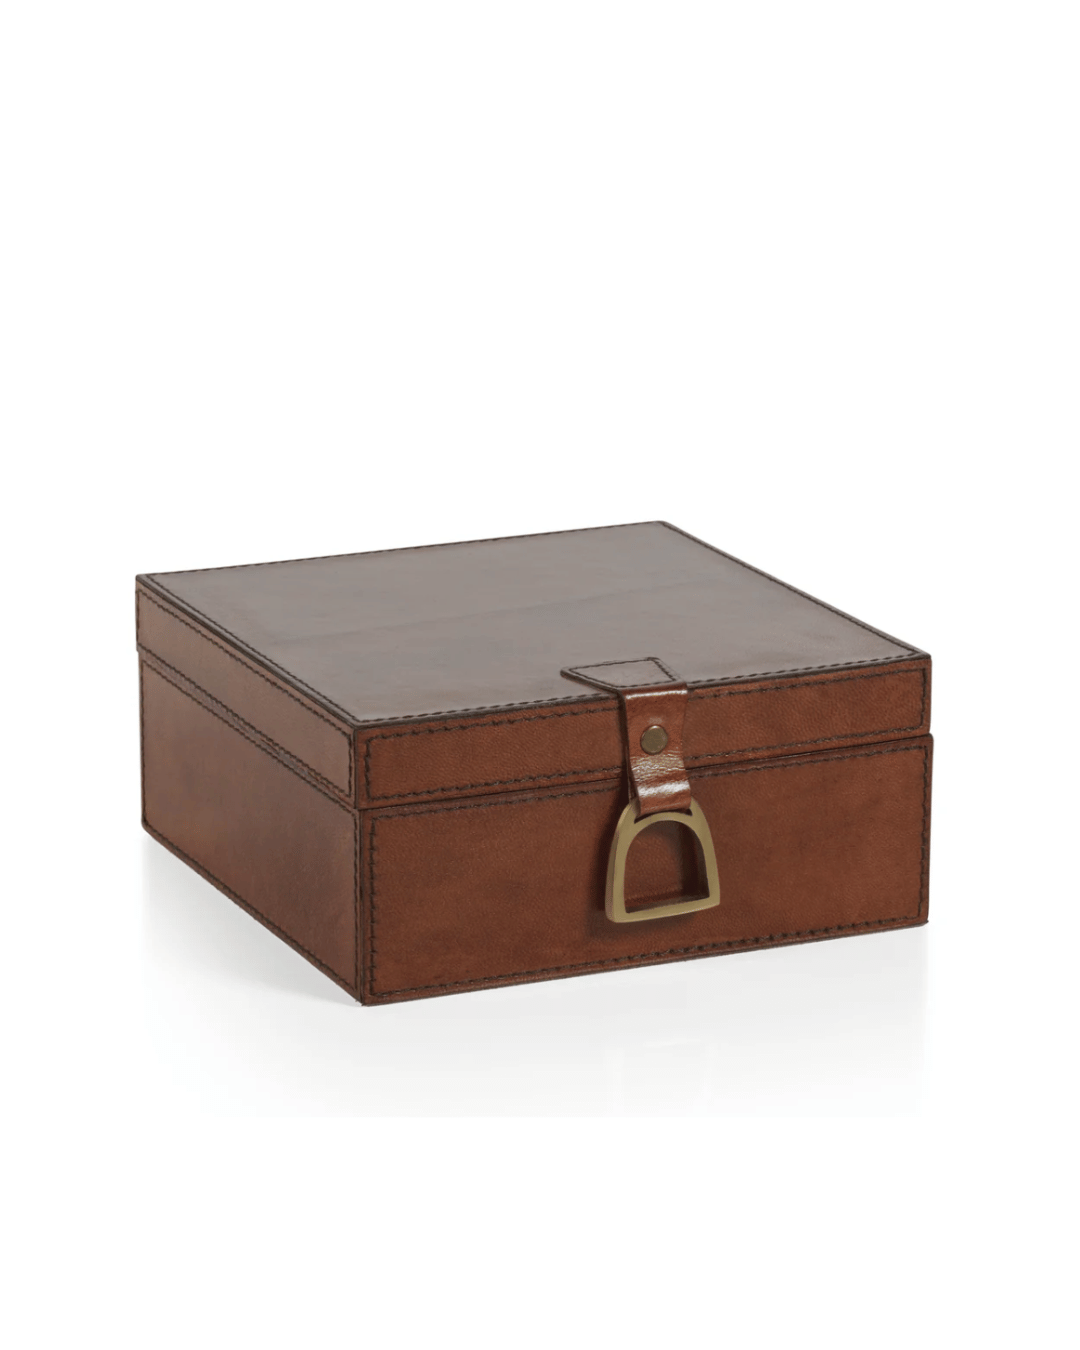 A Zodax Leather Box Small, featuring visible stitching along the edges. The lid is secured with a brass buckle clasp. The box, showcasing its precise dimensions, is placed against a plain white background.